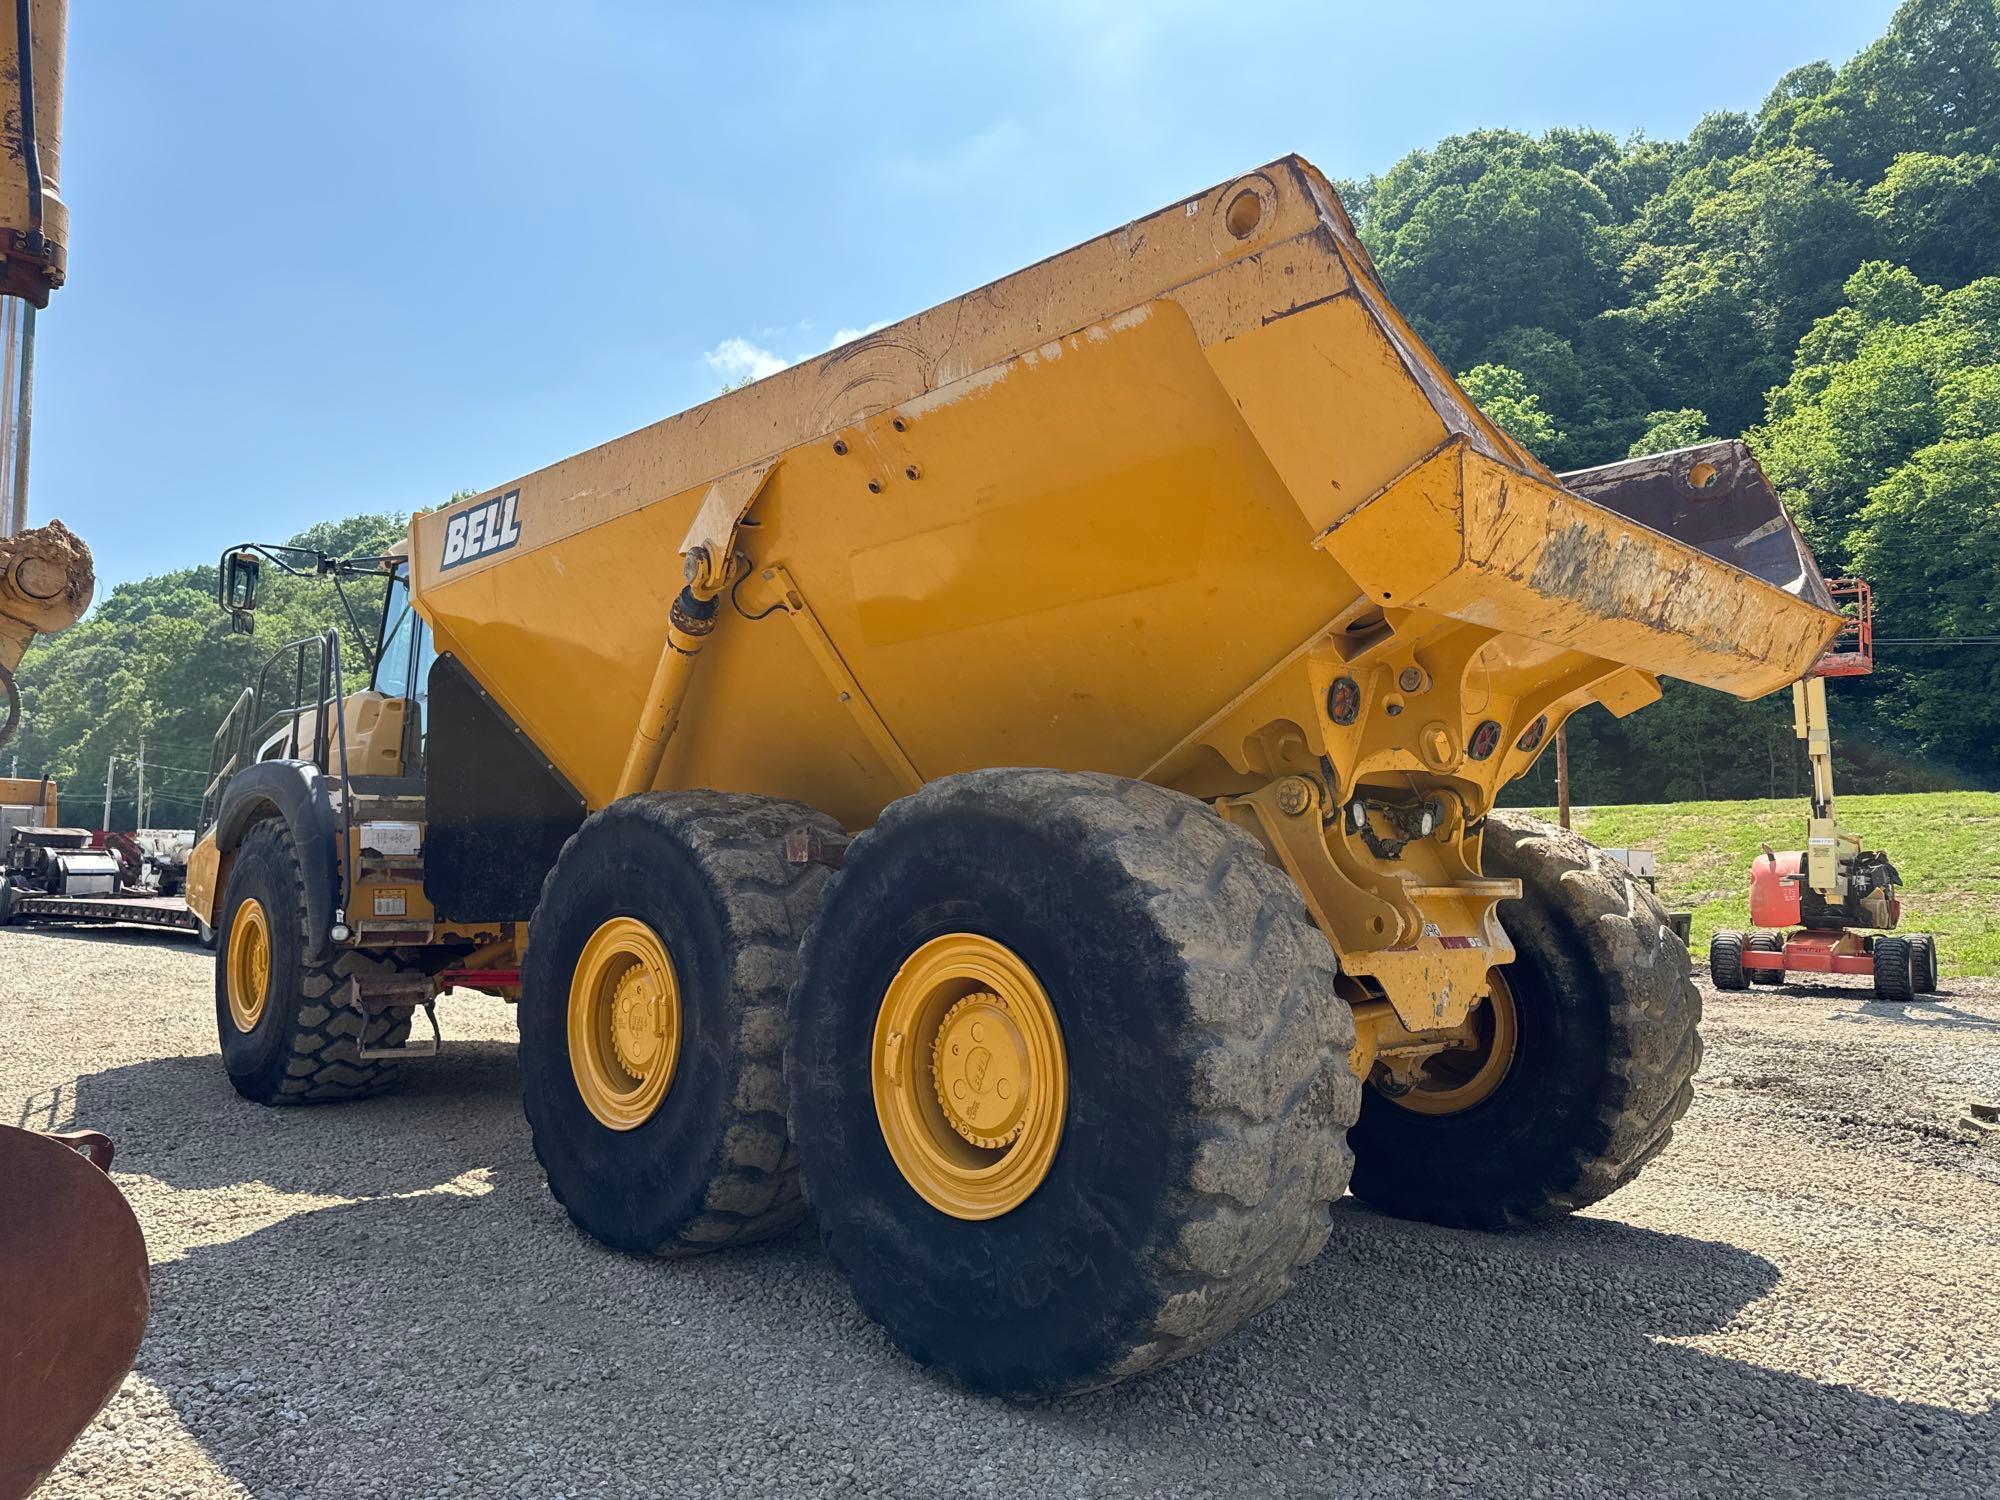 2017 BELL B45E ARTICULATED HAUL TRUCK SN:1105731 6x6, powered by diesel engine, equipped with Cab,